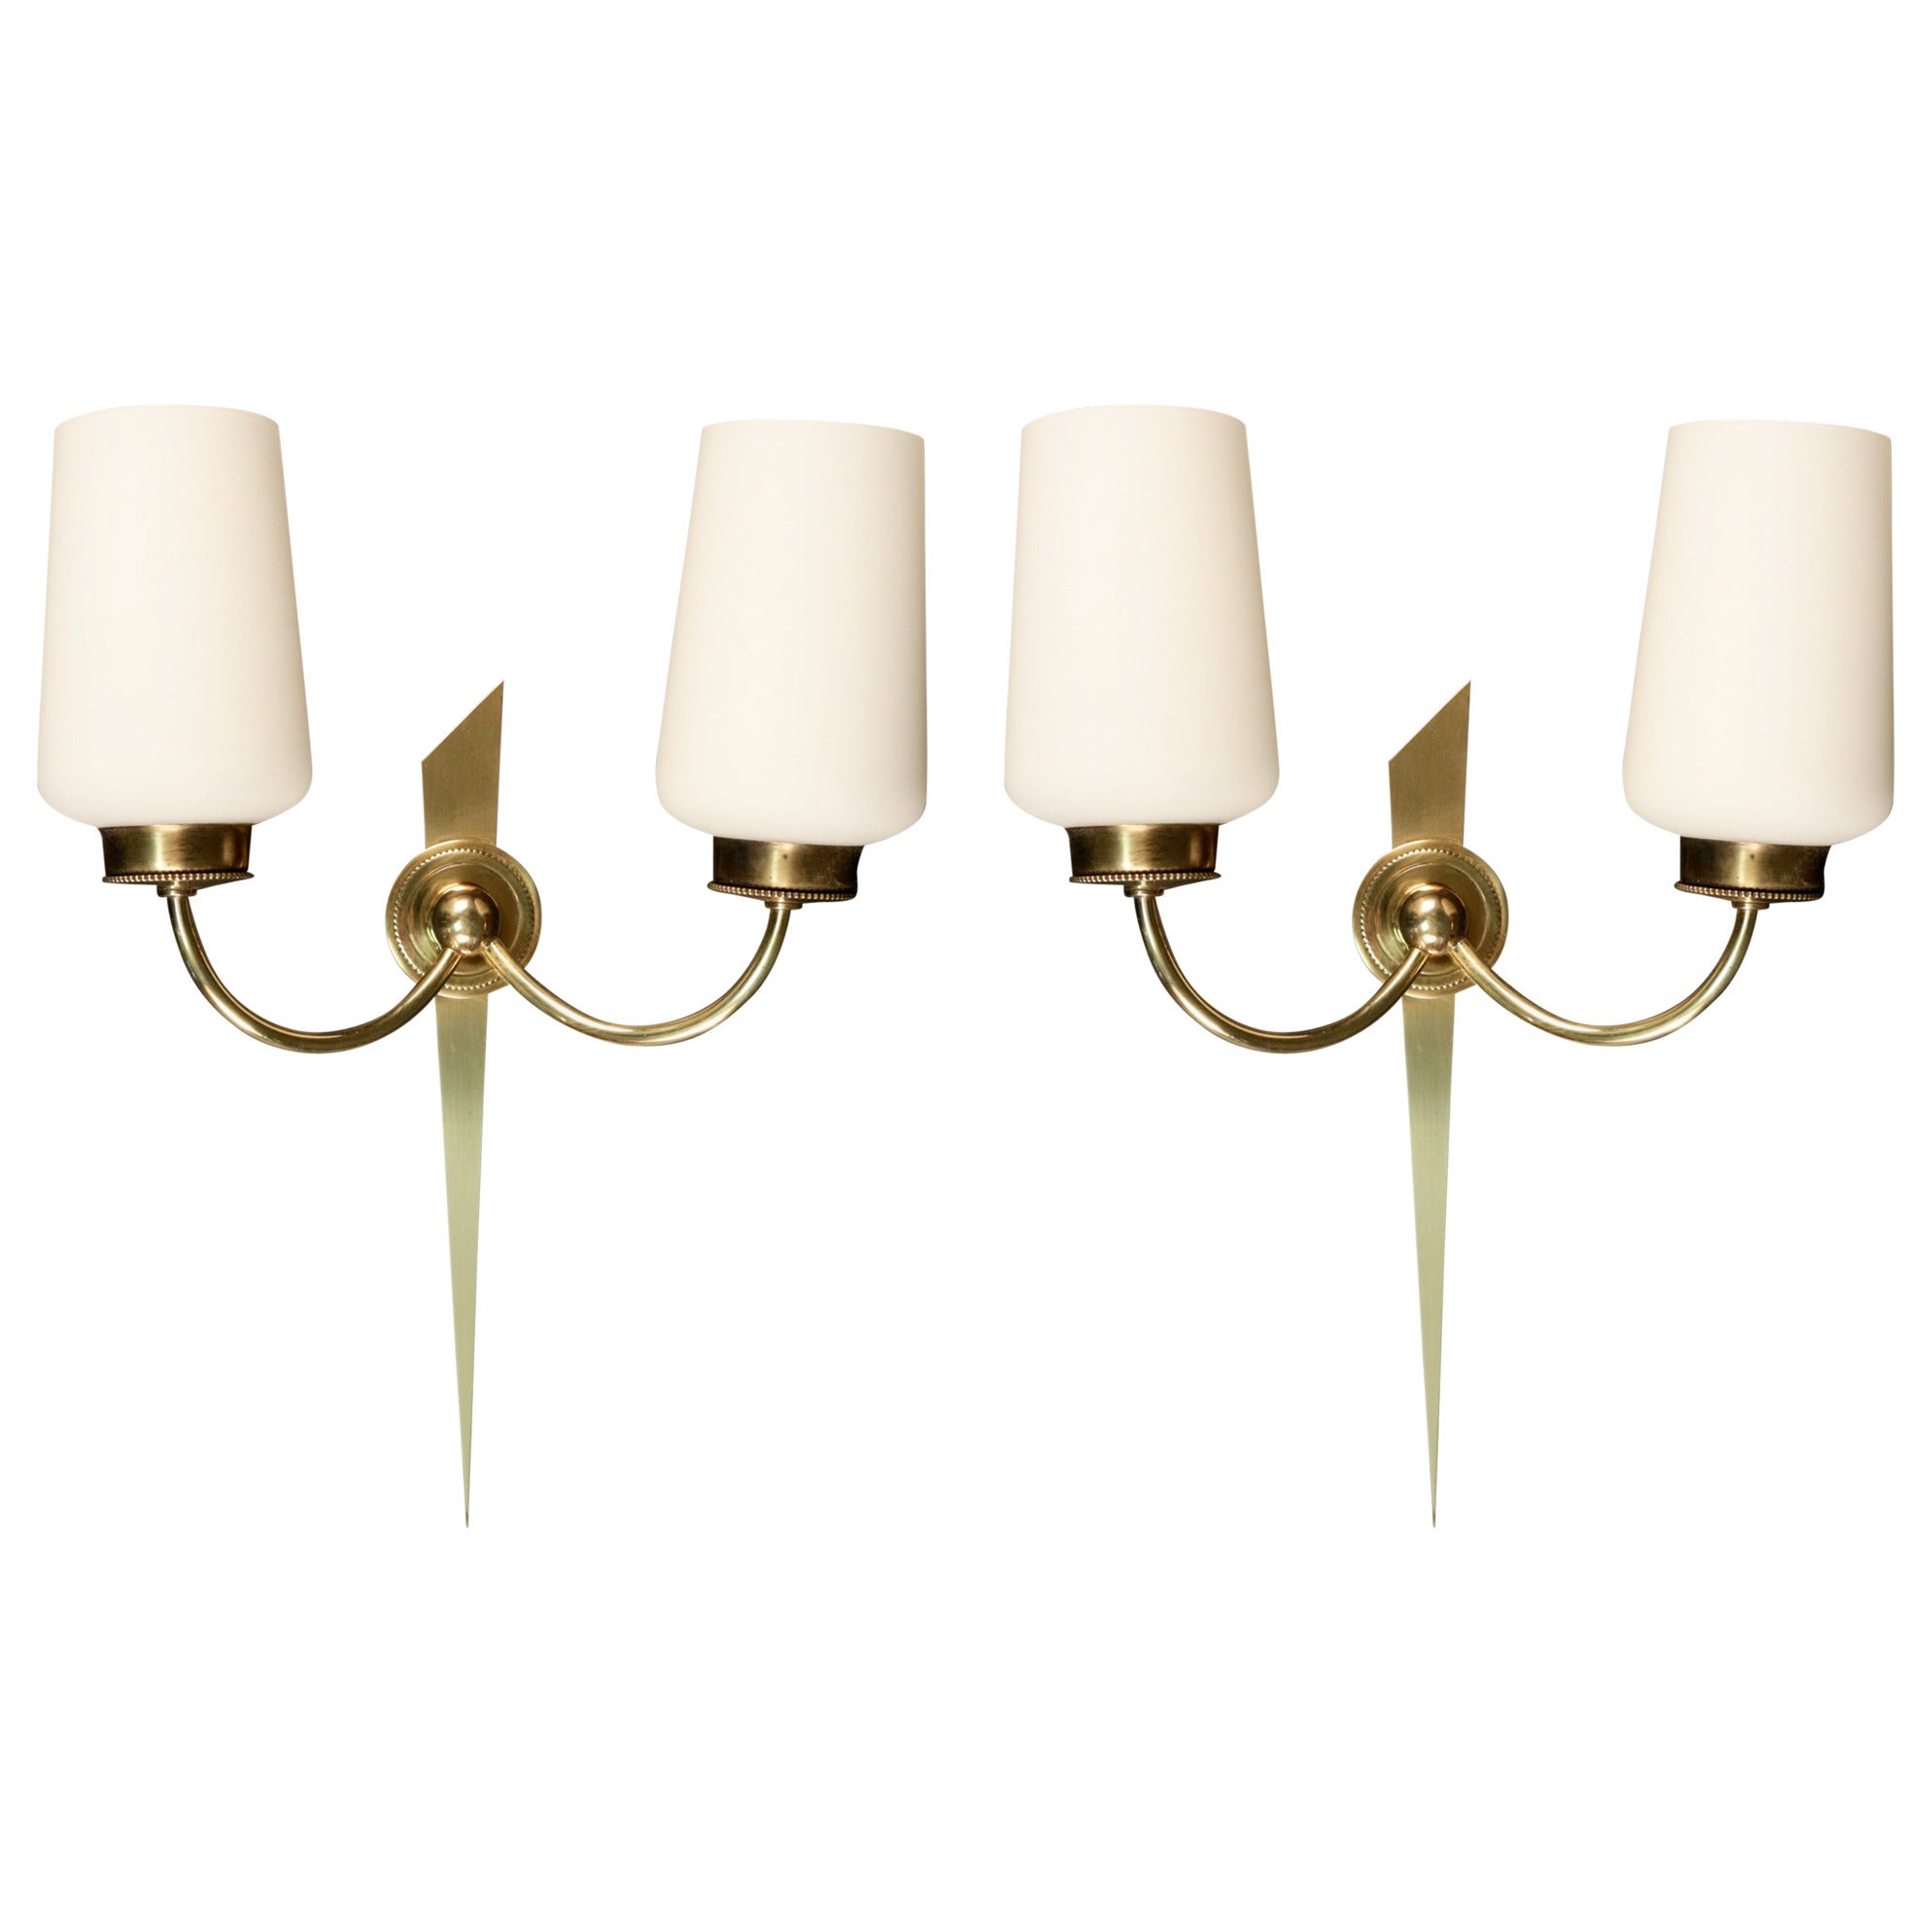 Pair of 1950s Bronze Sconces by Maison Arlus